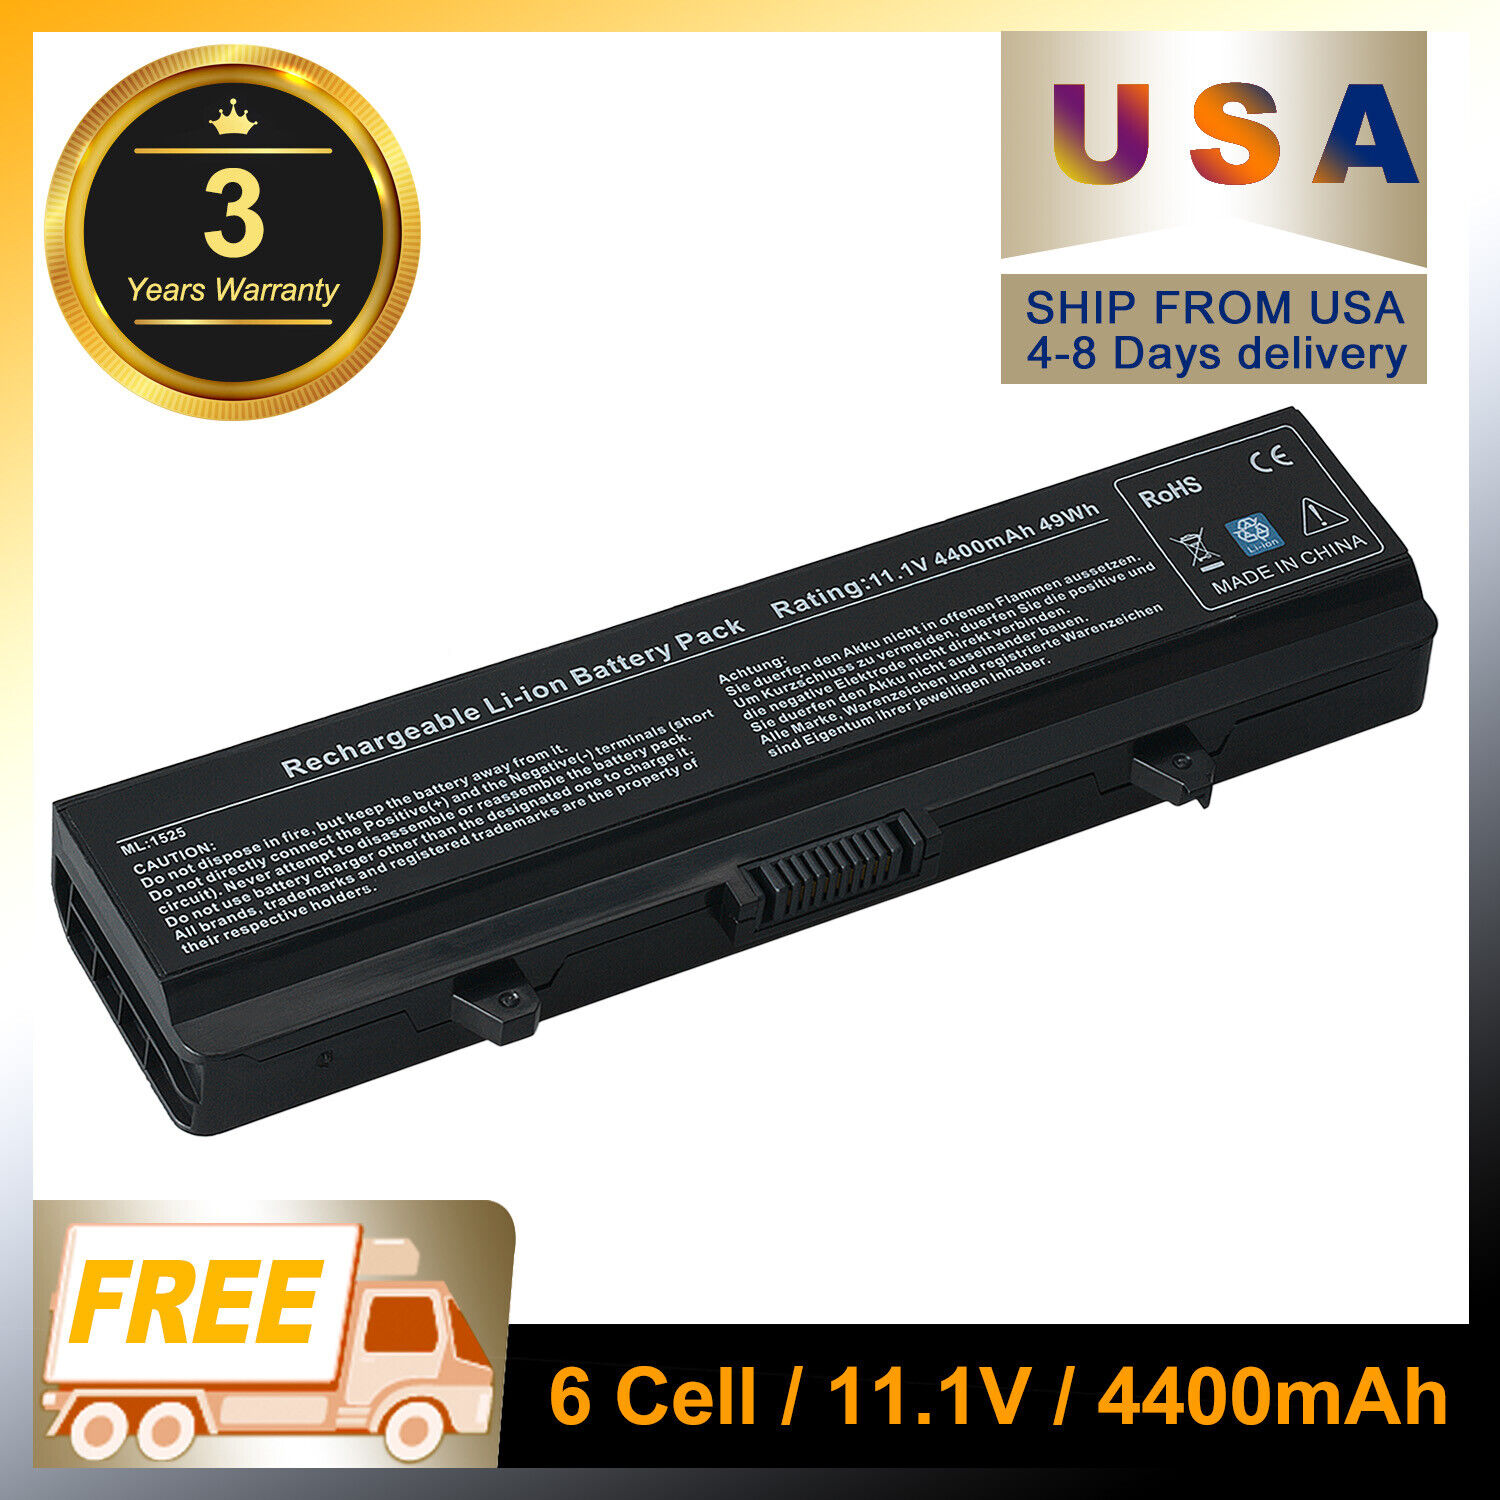 Type X284G Battery for Dell Inspiron 1440 1525 1526 1545 1750 PP29L K450N GW240